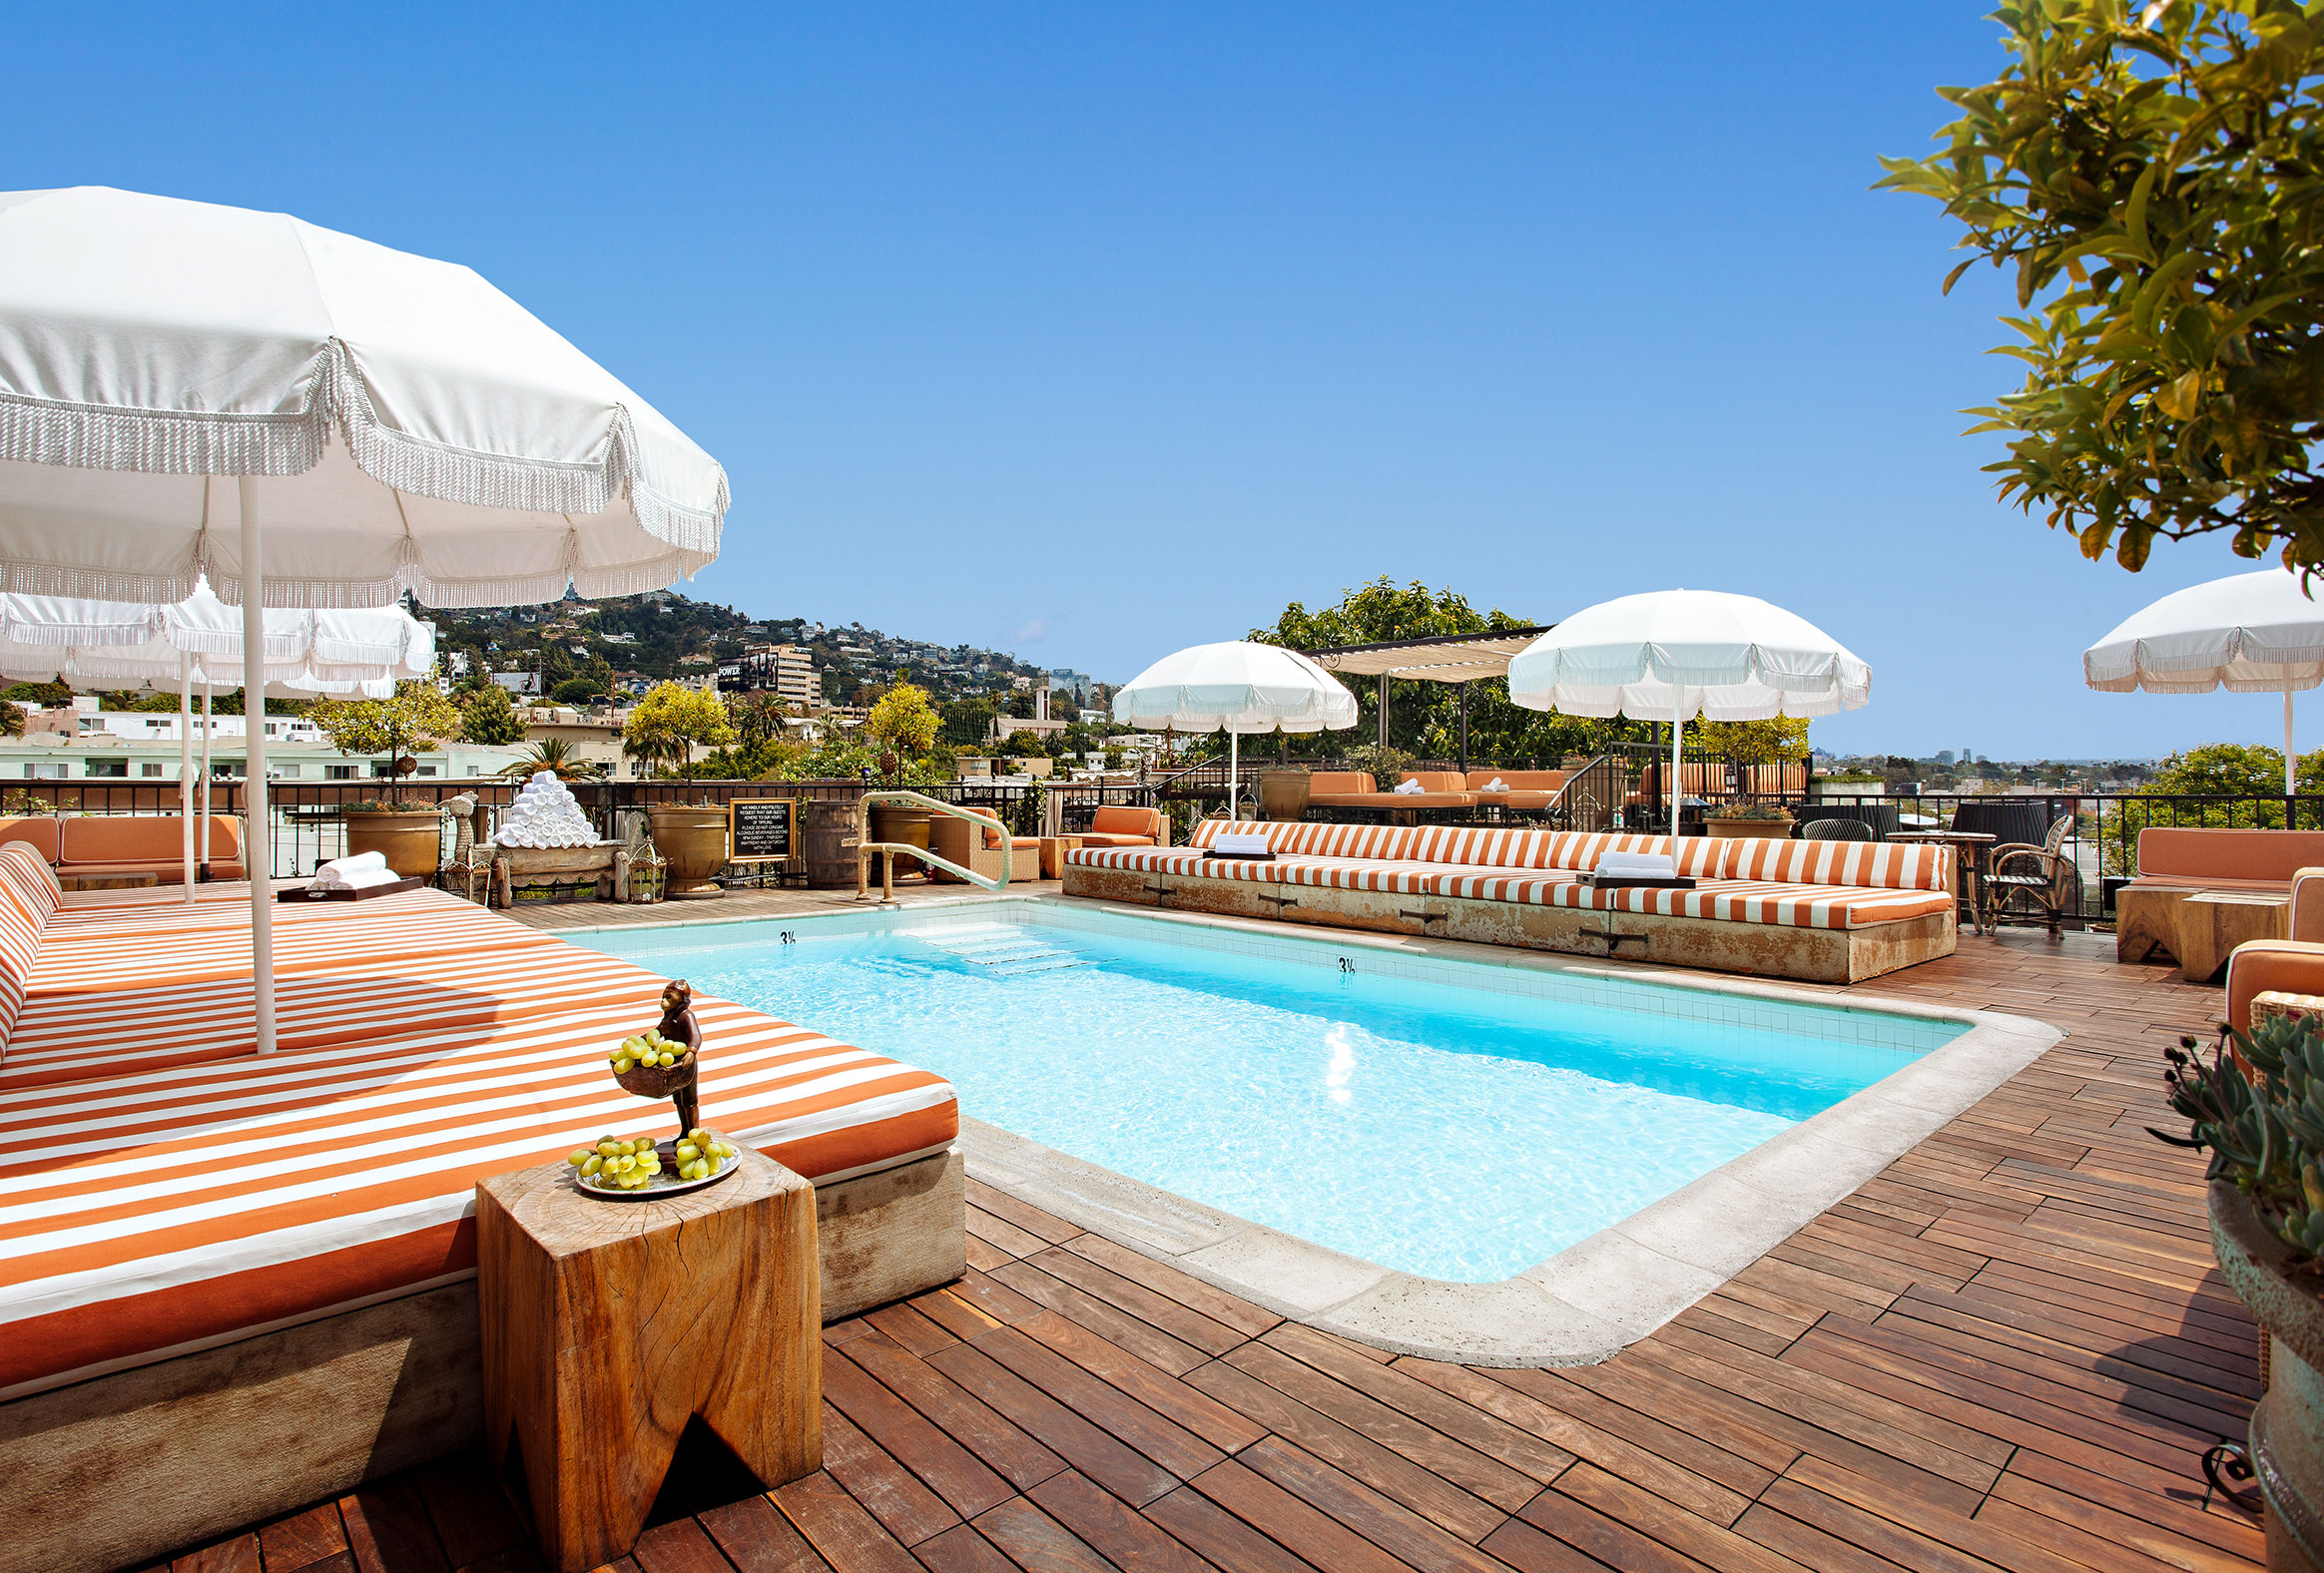 Small swimming pool surrounded by wooden decking, red and white striped sun loungers with white umbrellas